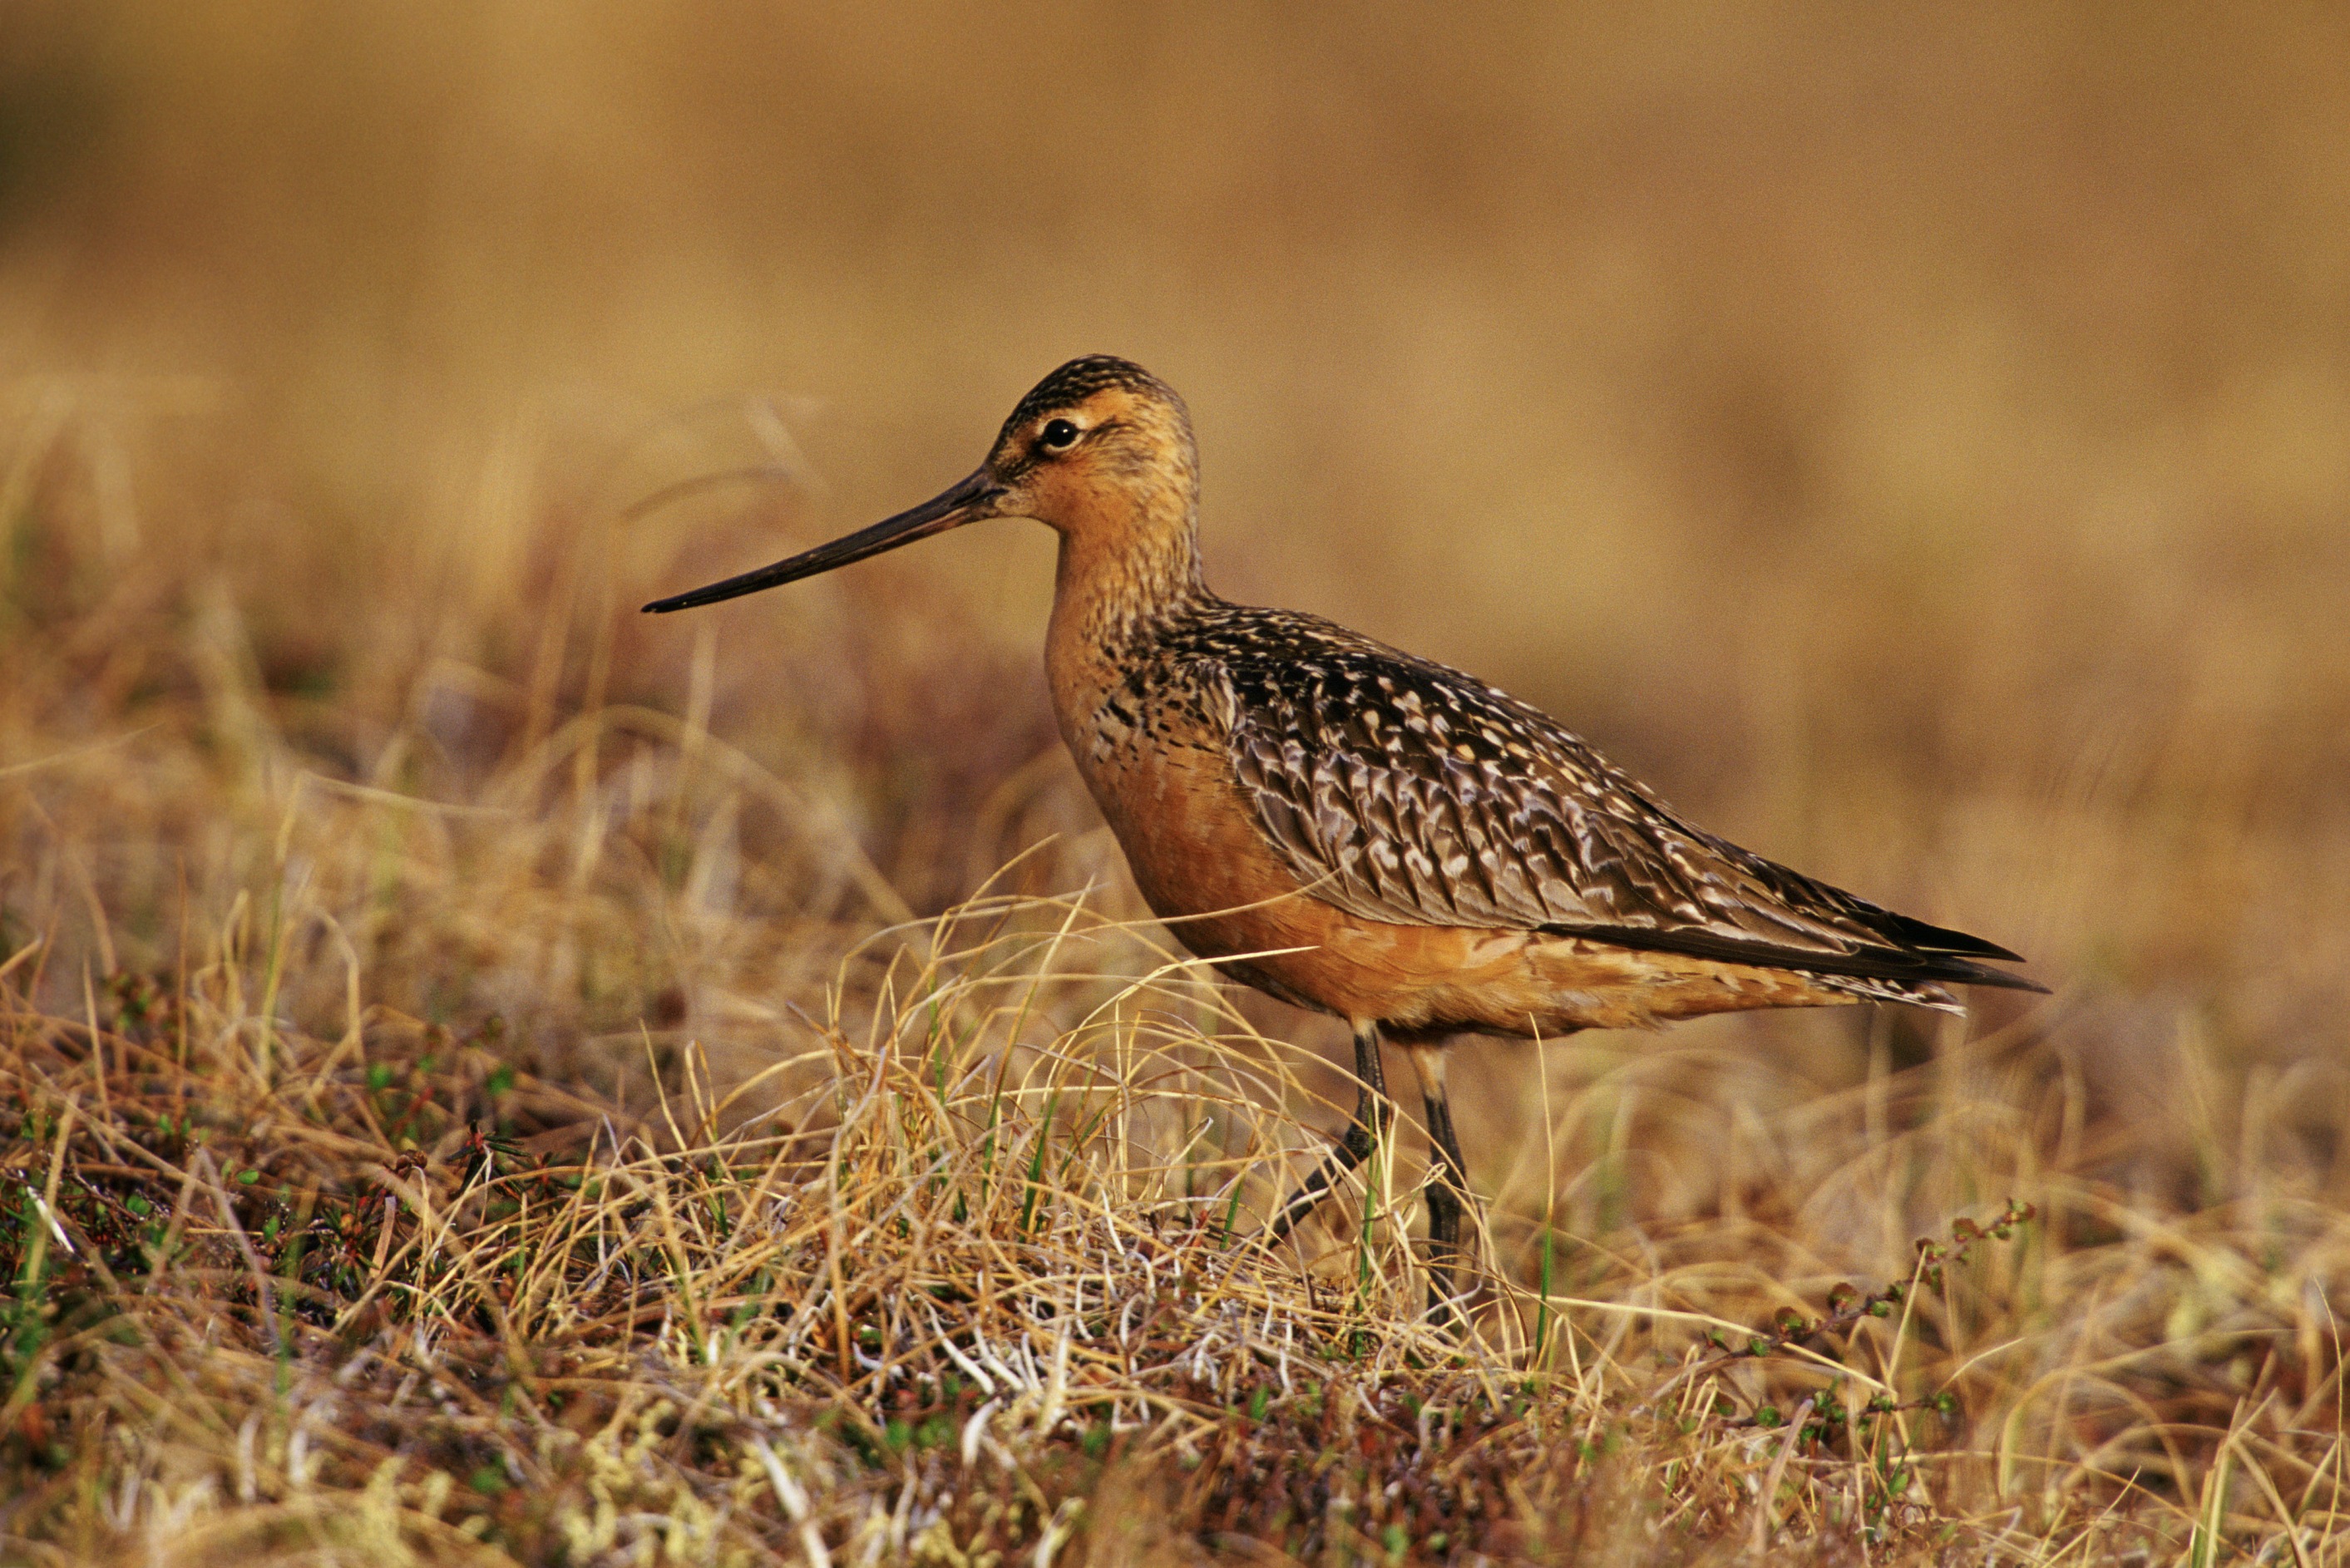 Bar-tailed Godwit in field